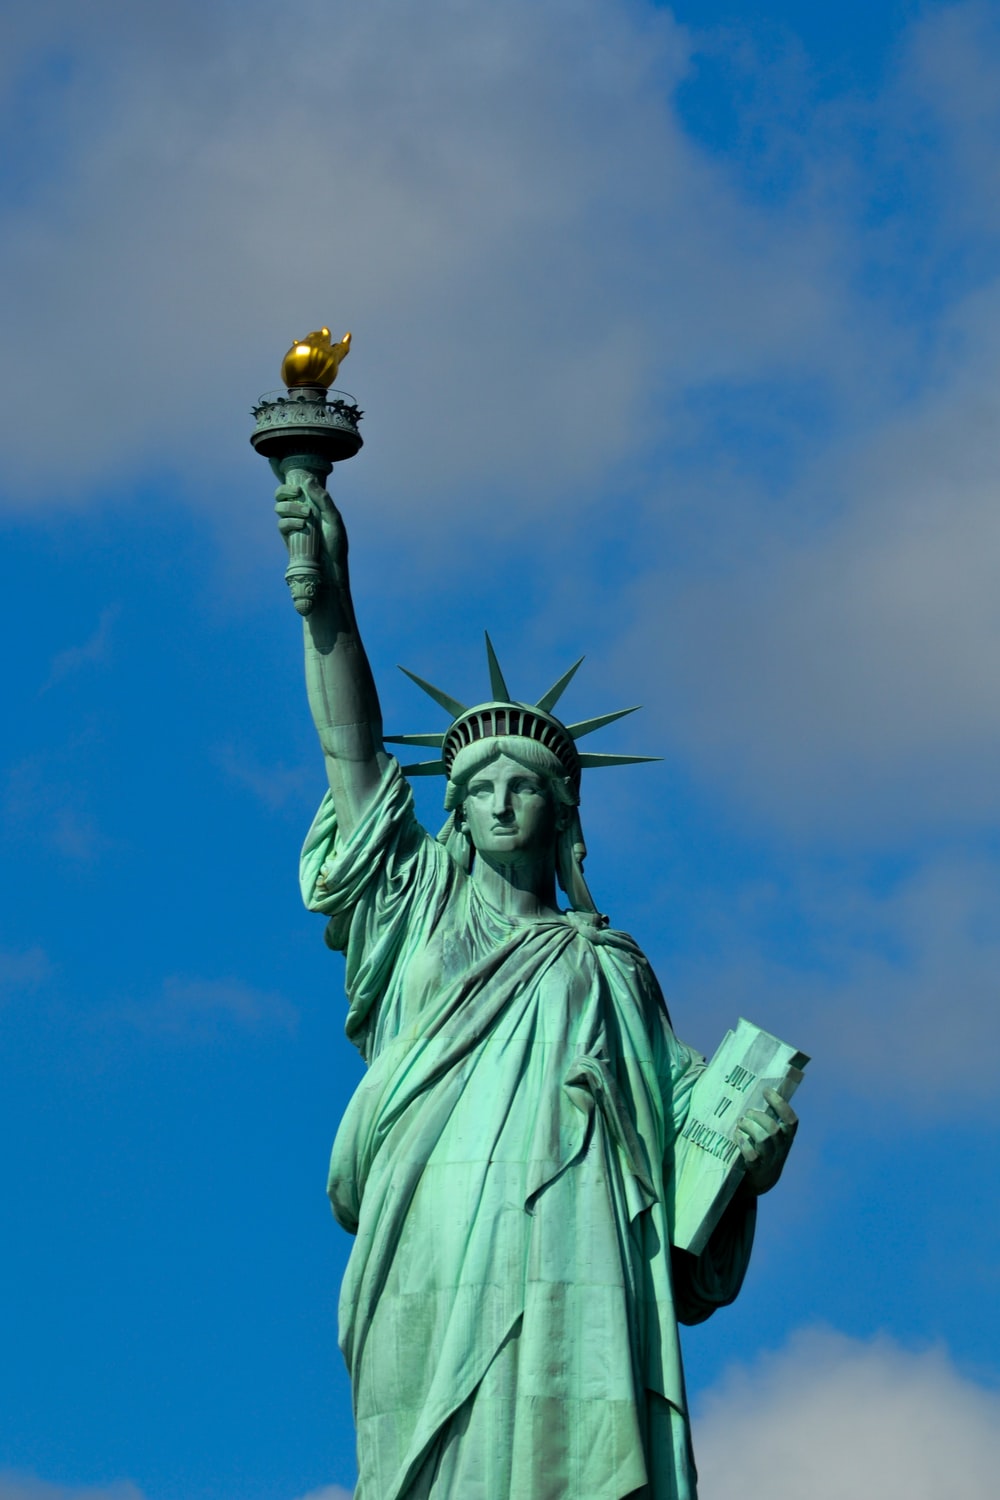 HQ The Statue Of Liberty Picture. Download Free Image